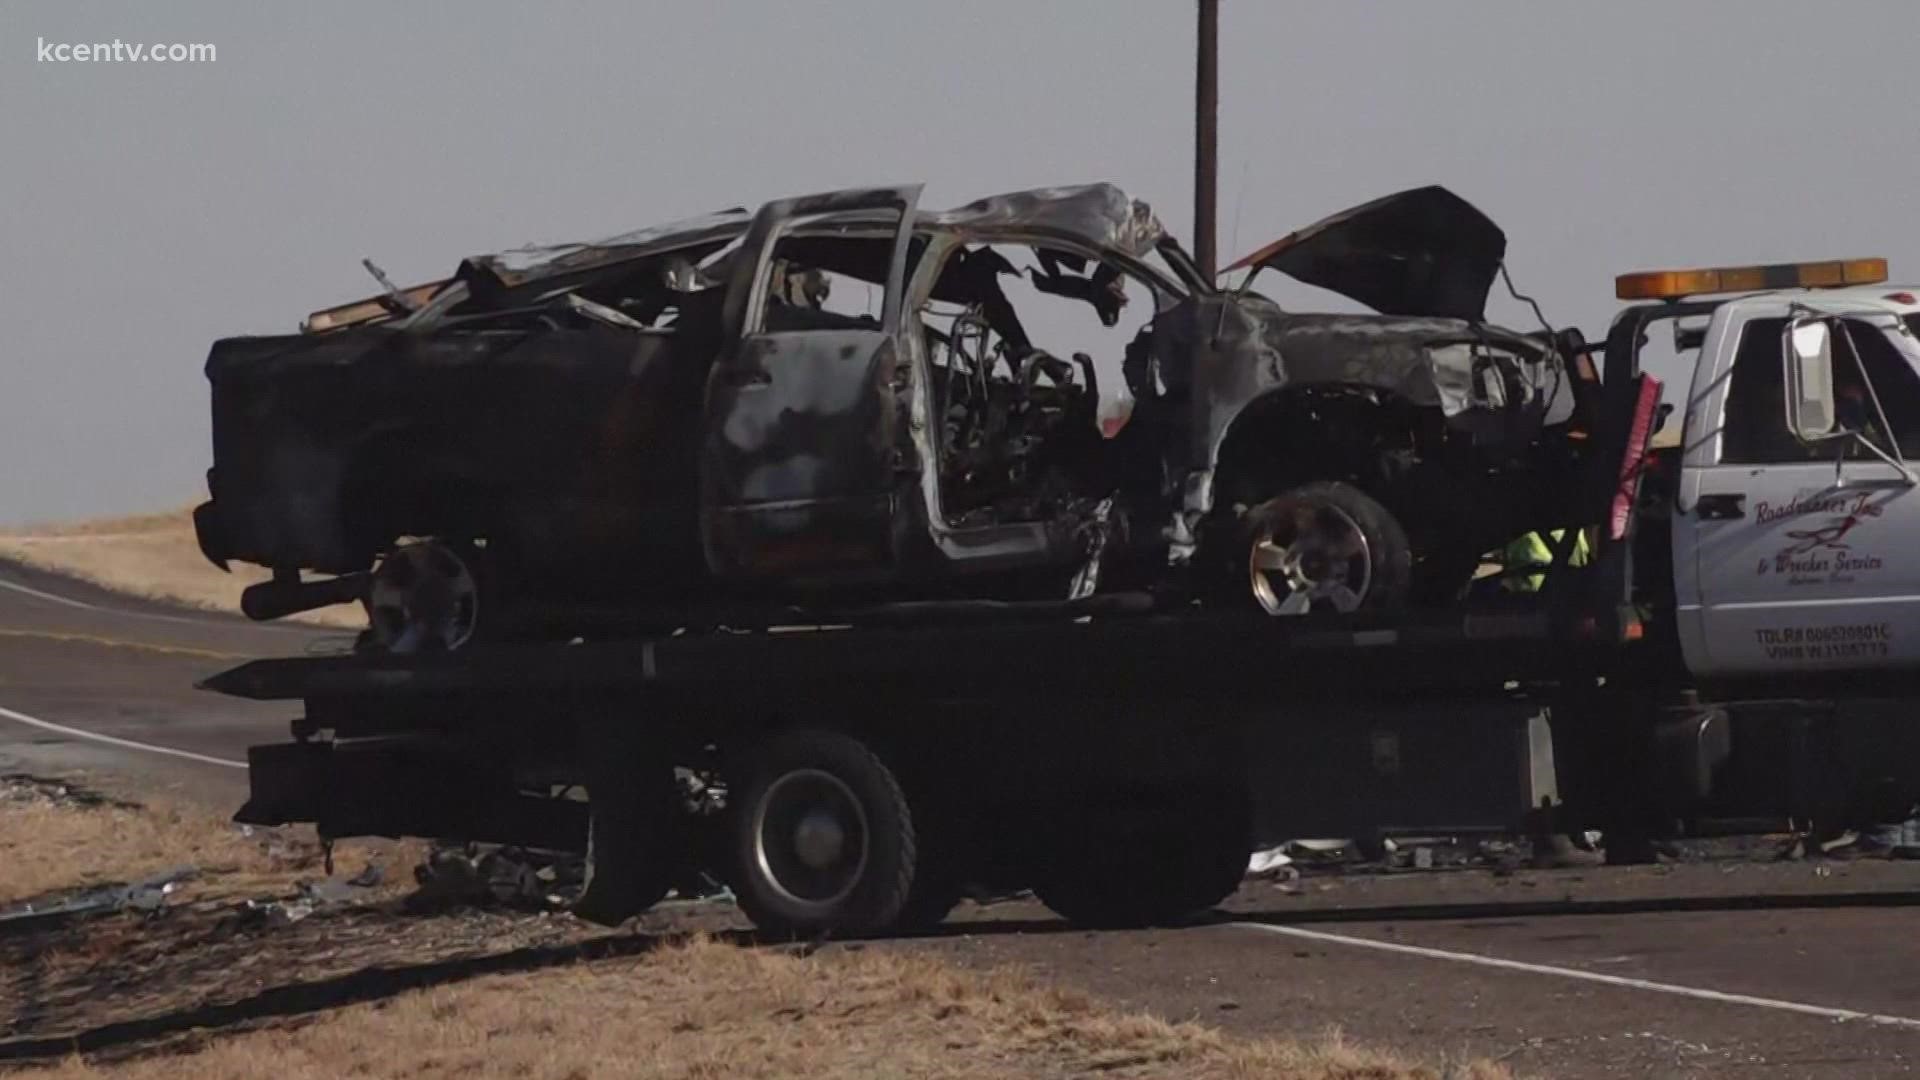 DPS says a pickup truck crossed the center line of a highway and crashed into a vehicle carrying members of the University of the Southwest golf teams.